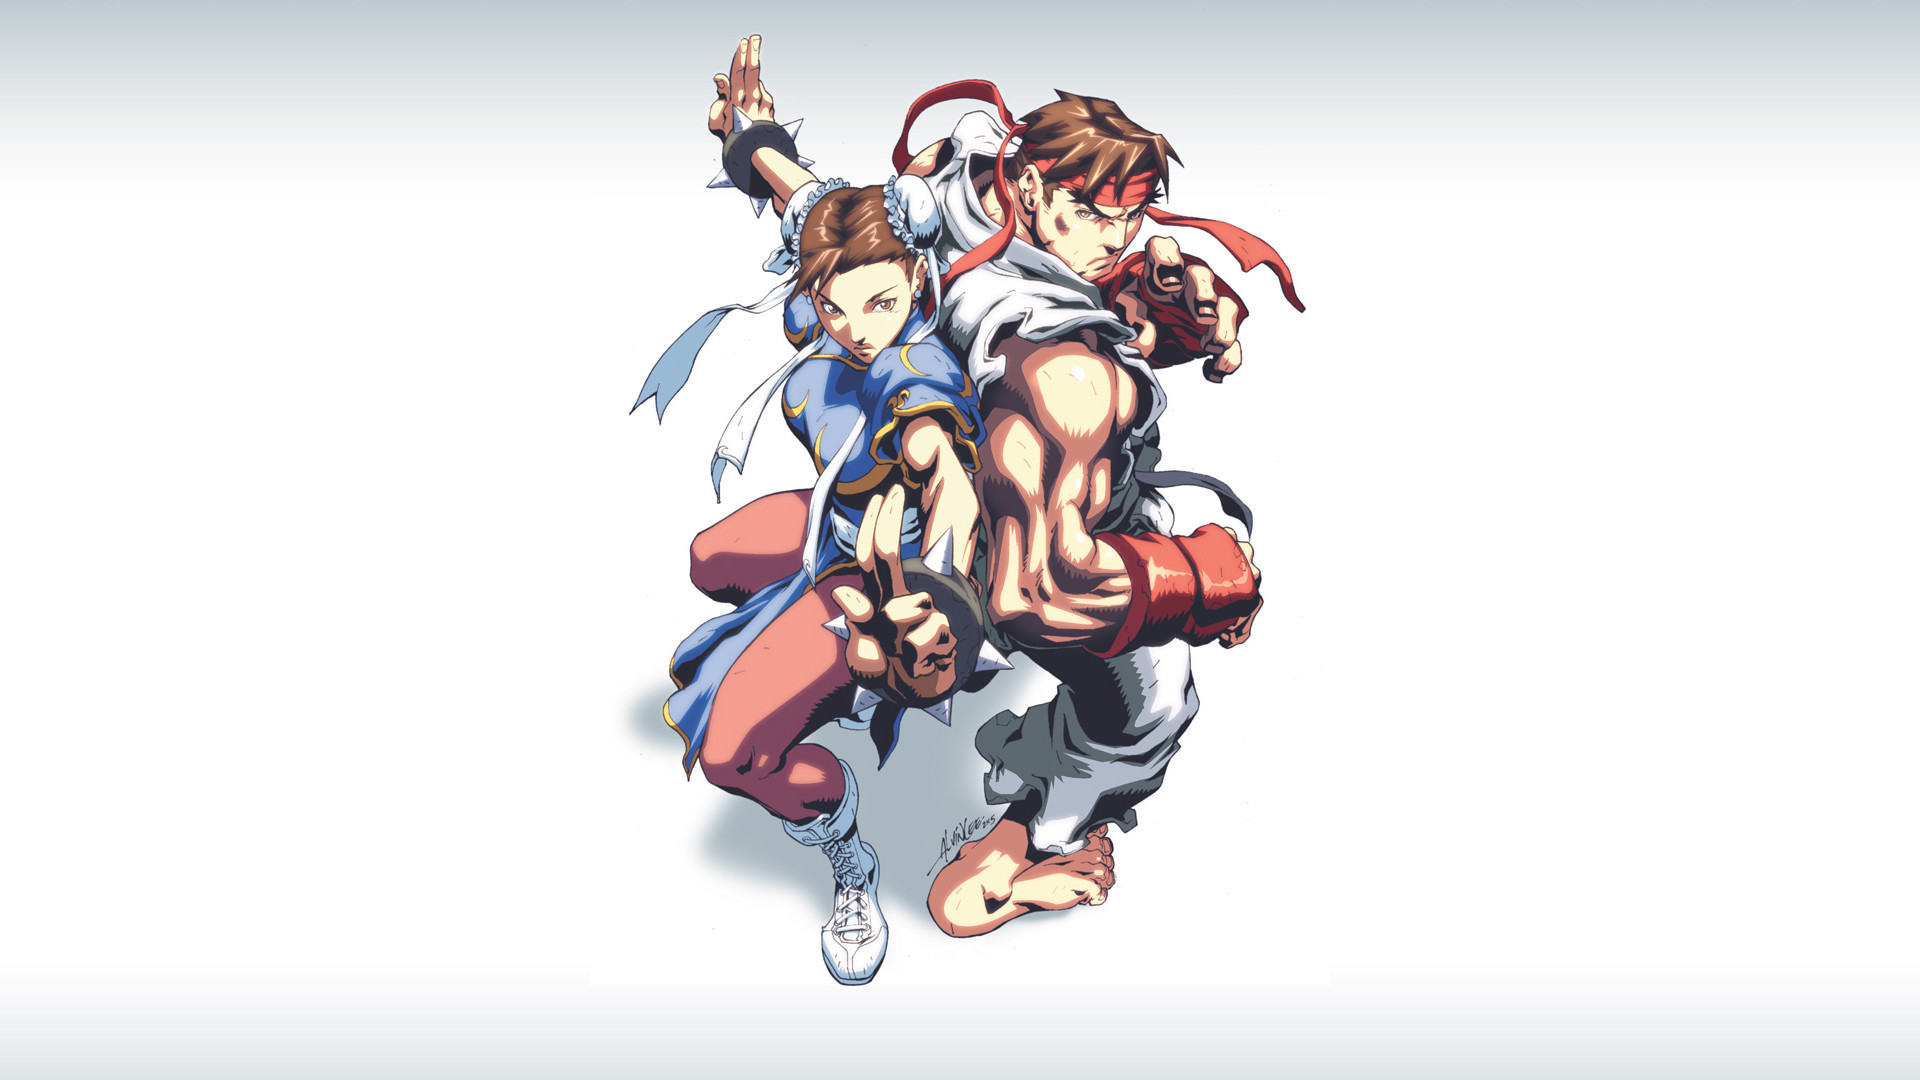 1920x1080 Street Fighter Wallpapers